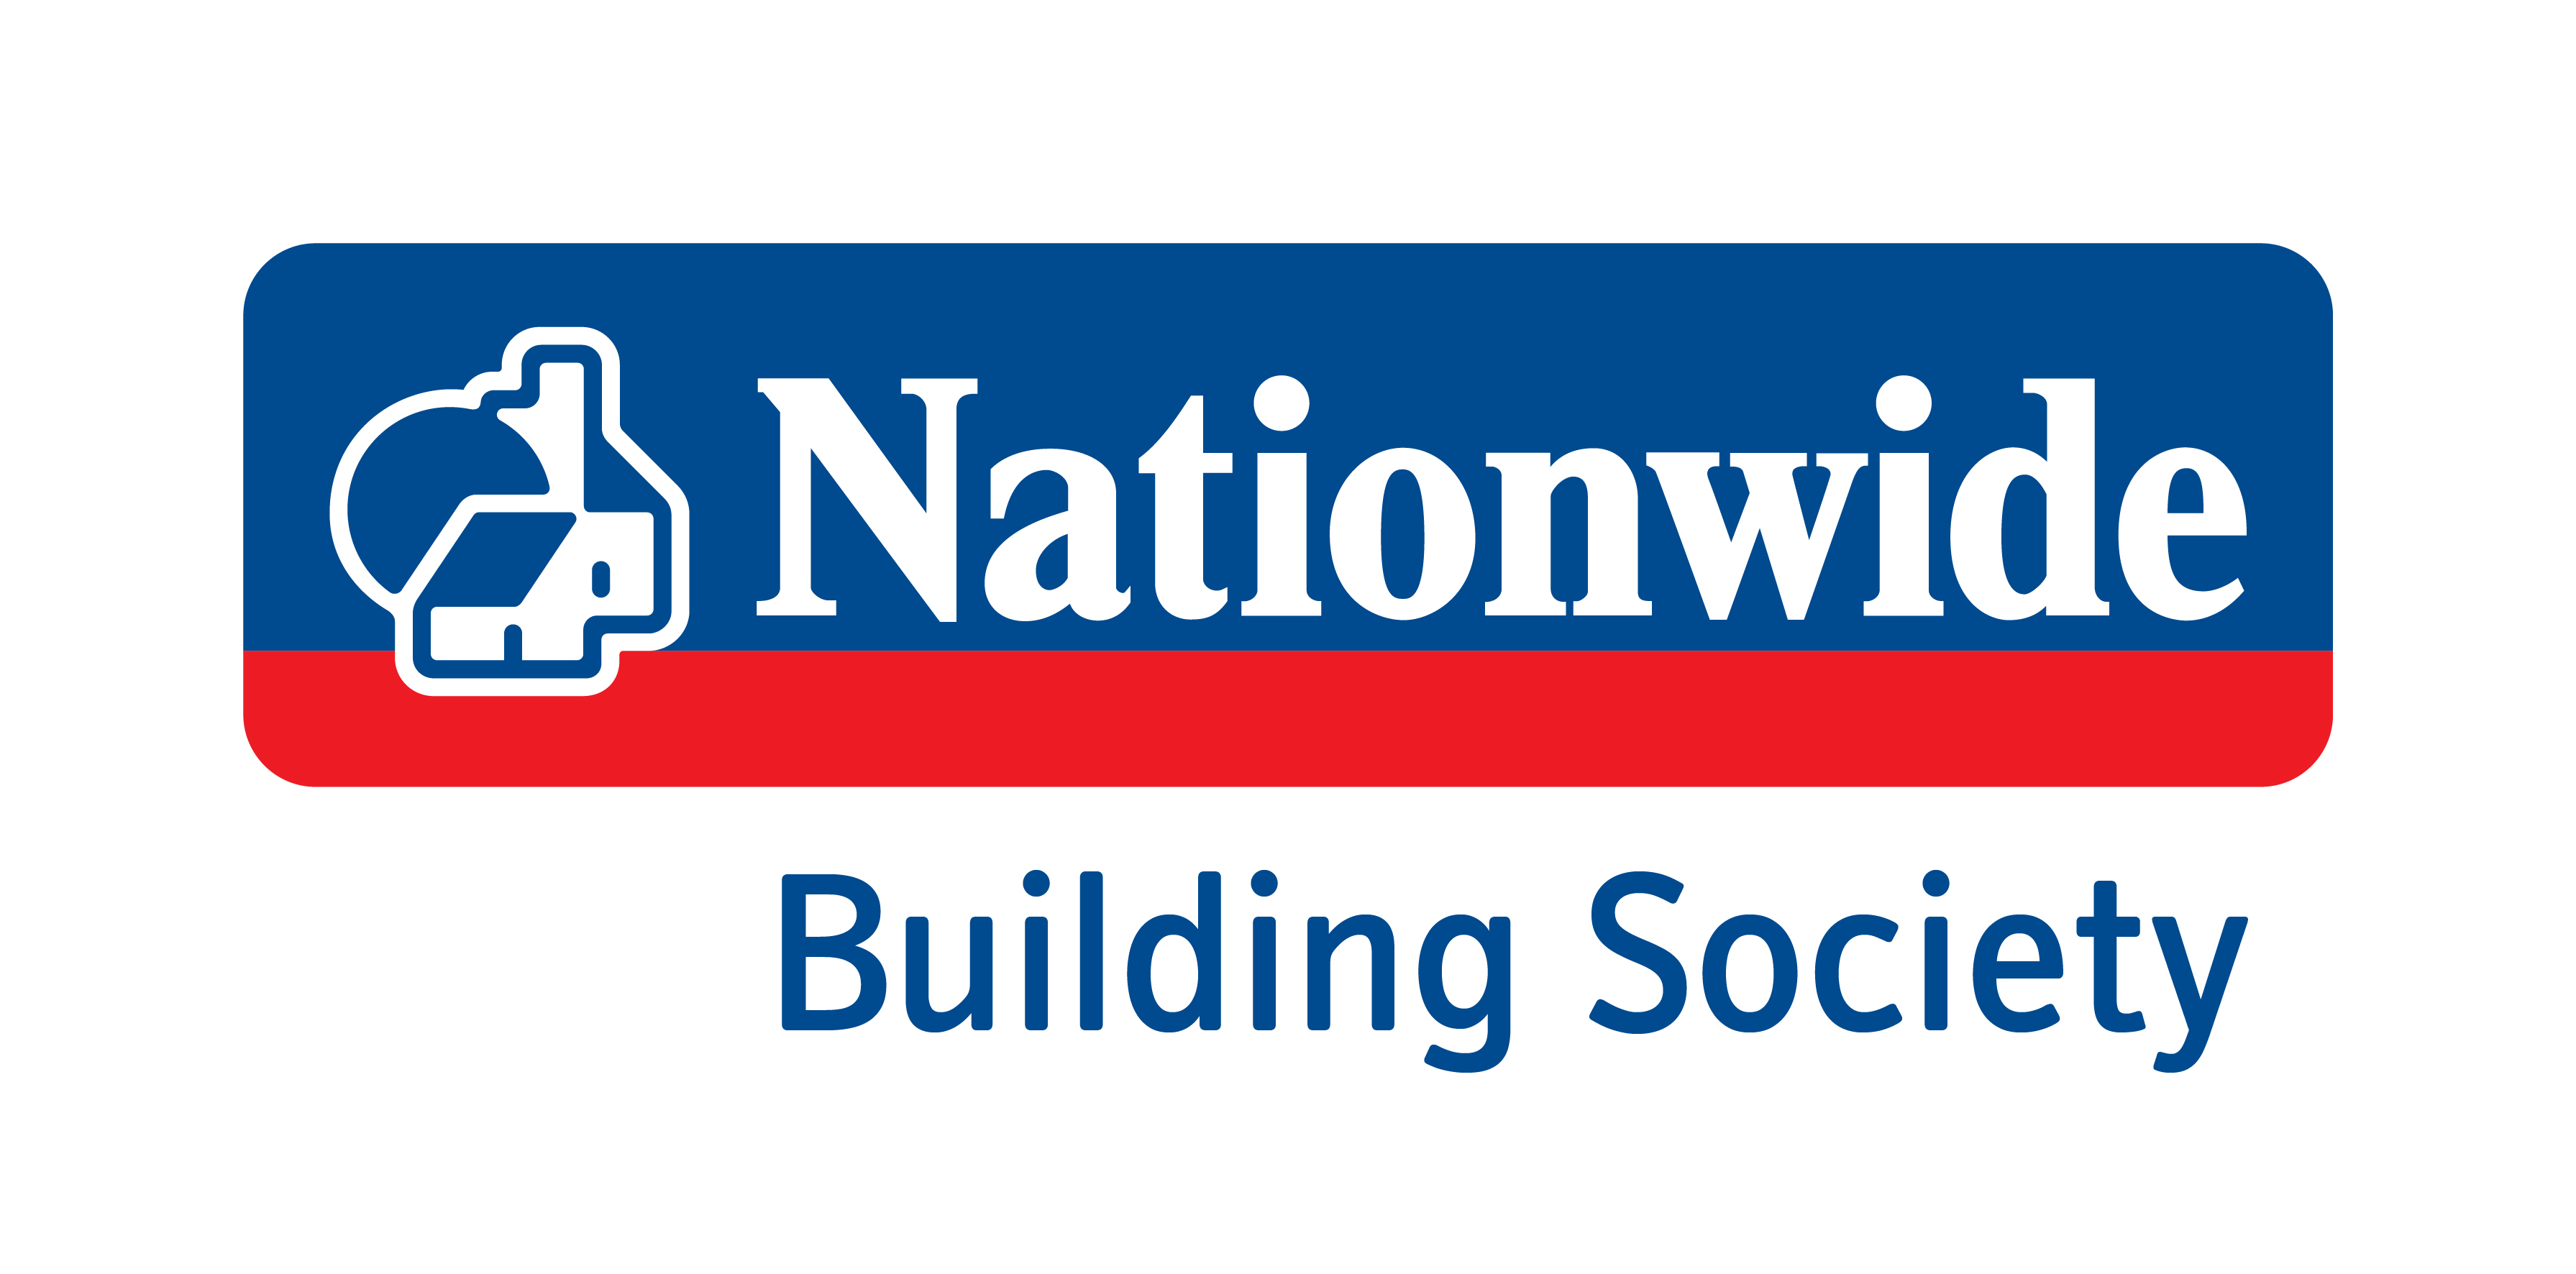 Nationwide offering two, three and five-year fixed rate mortgages below 1% 